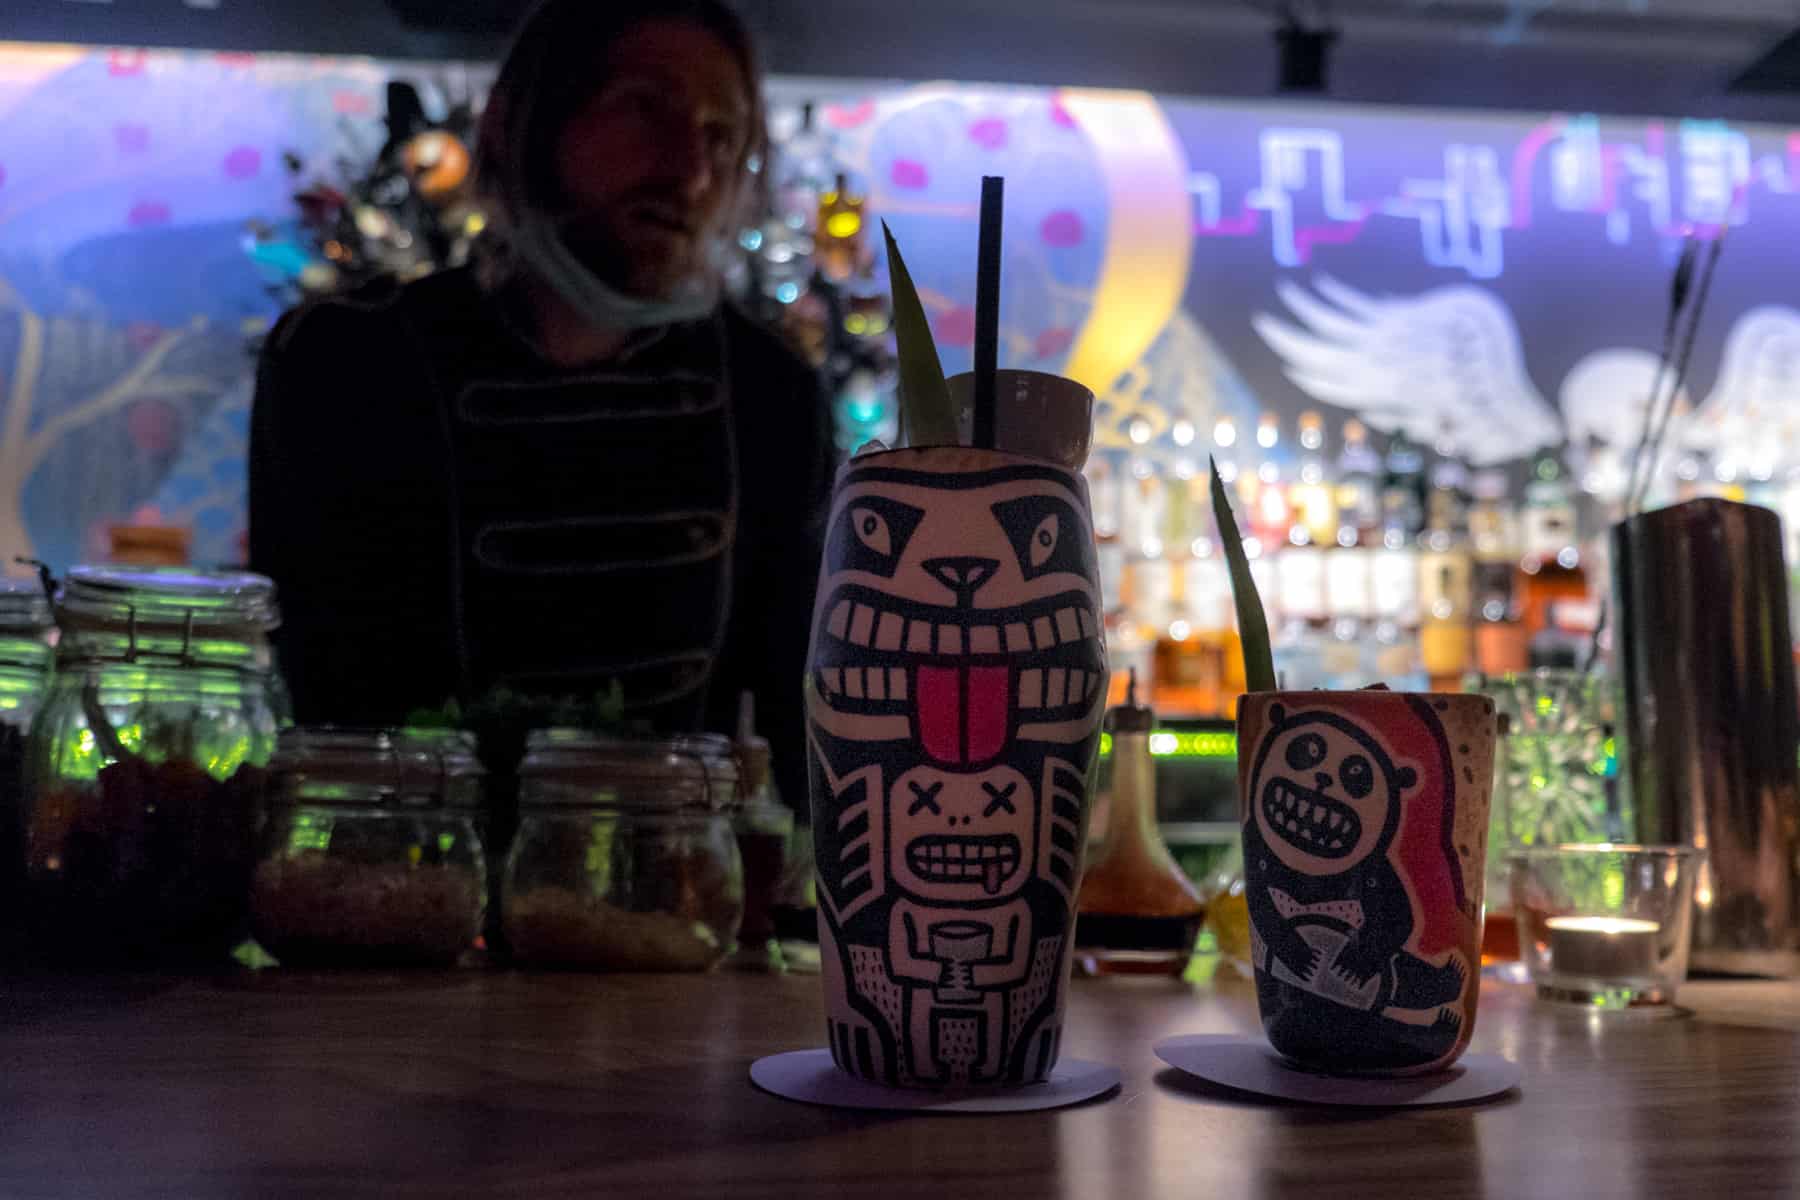 A barman stands behind two cocktails in panda artwork classes, at the funky decorated Super Panda Circus bar in Brno.